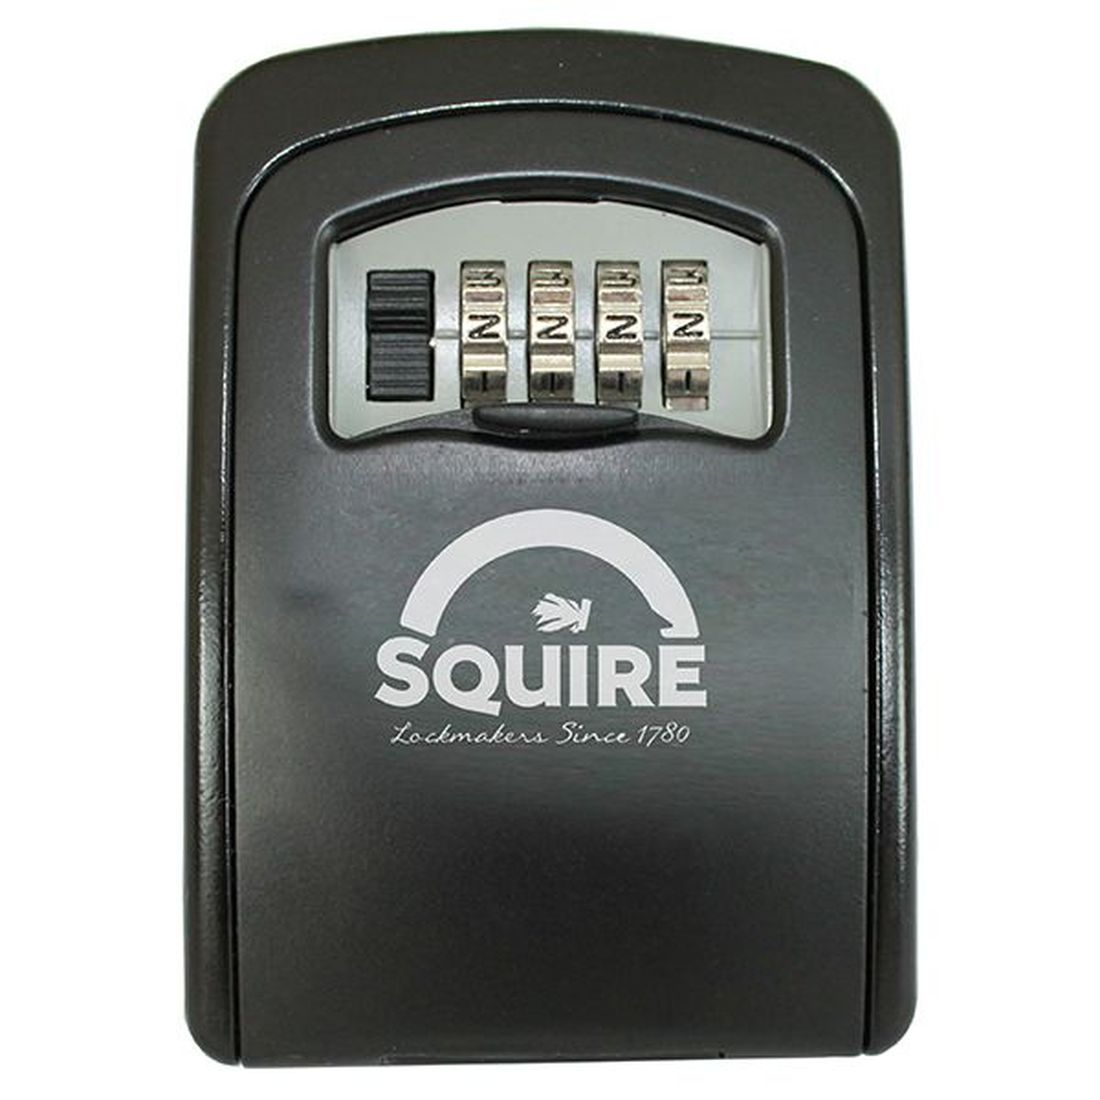 Squire Combination Key Safe              